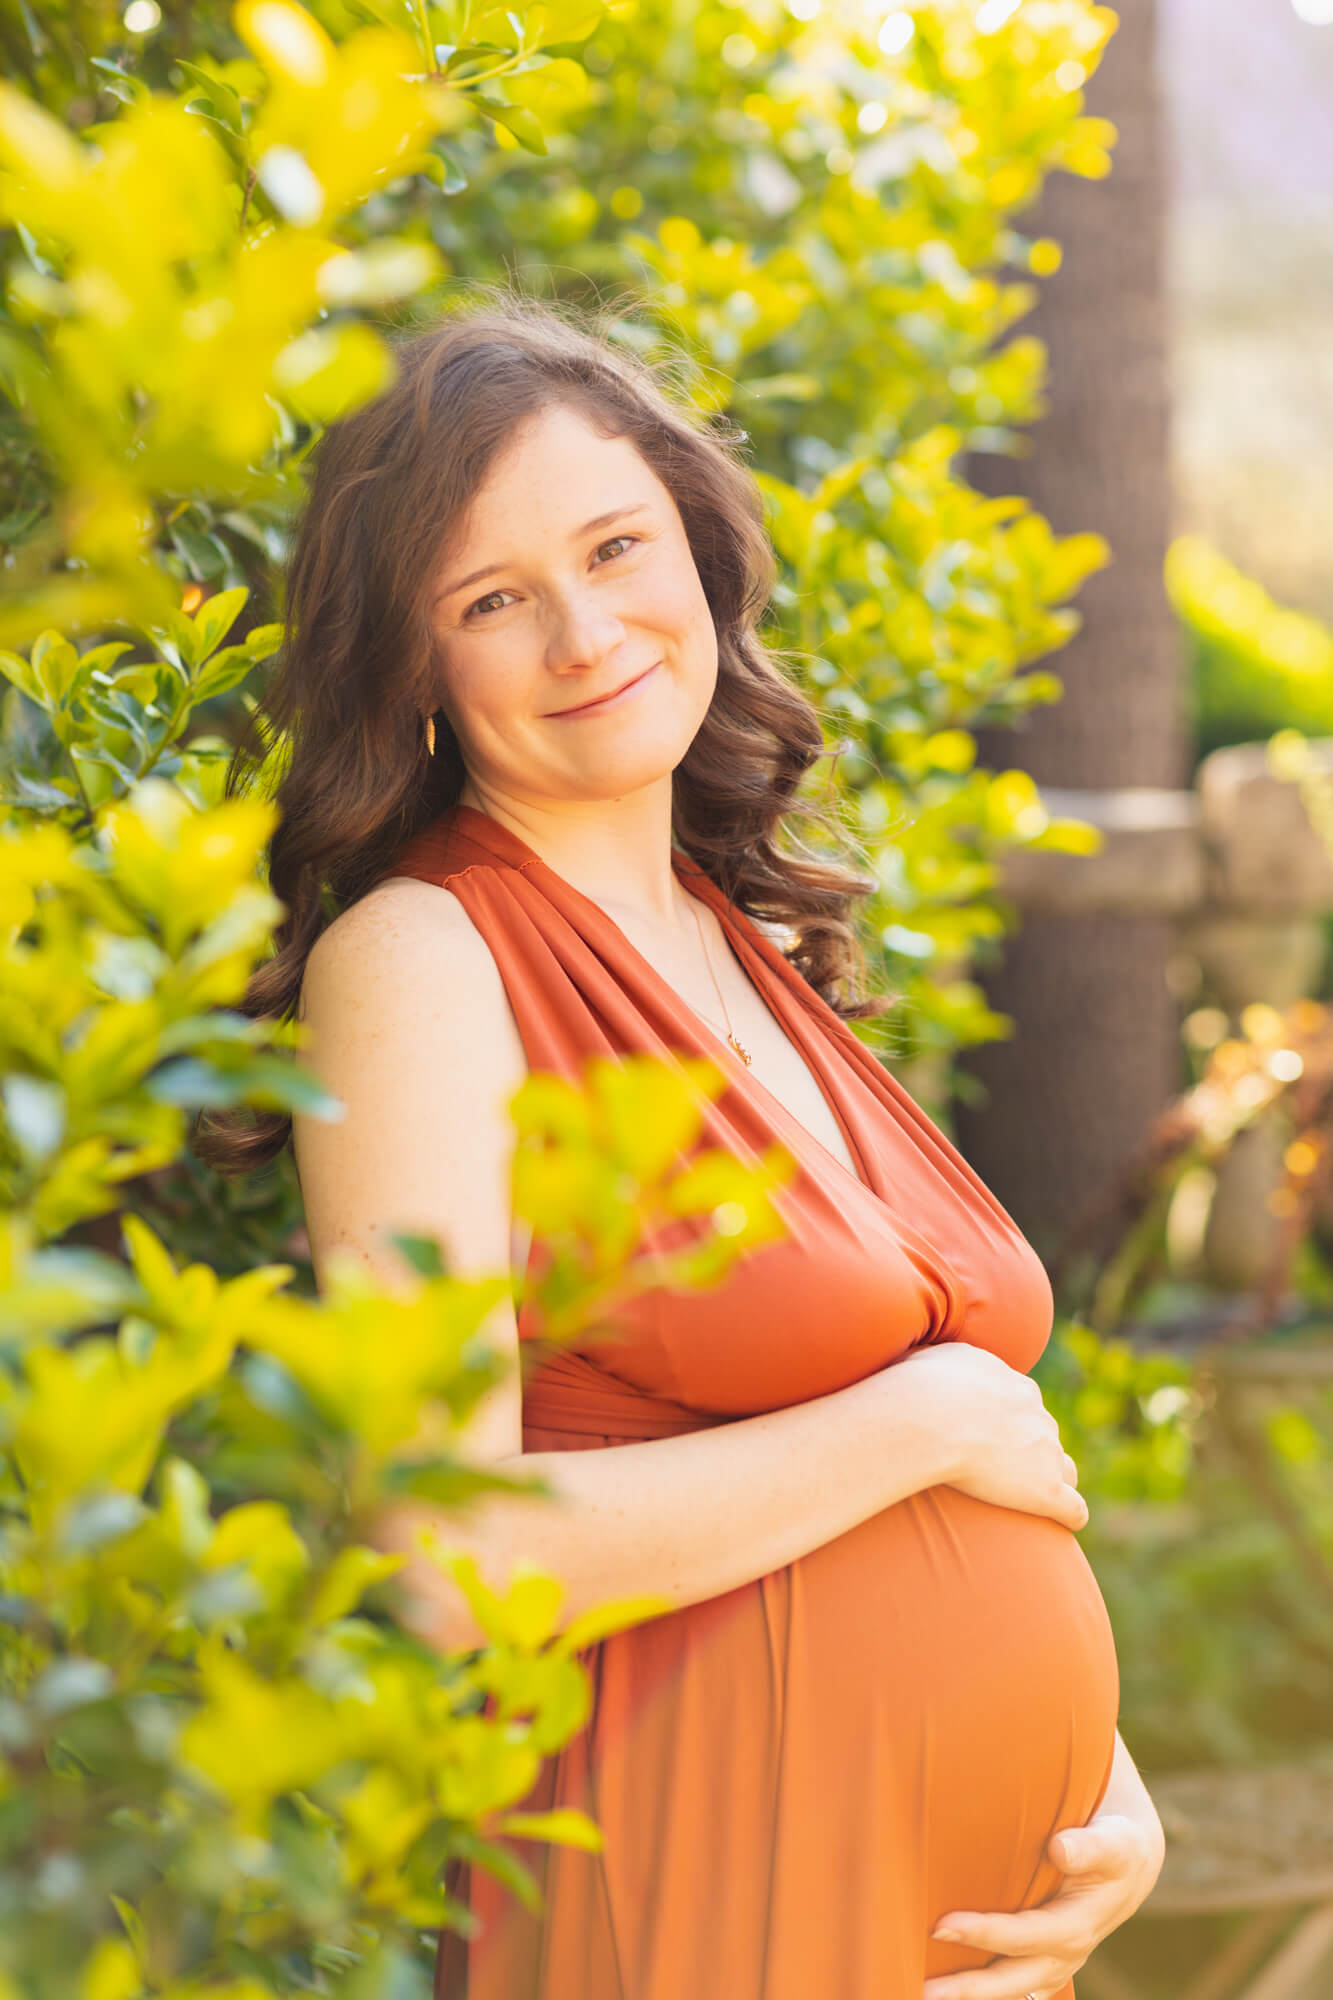 pregnant woman in orange maternity gown standing in greenery and smiling